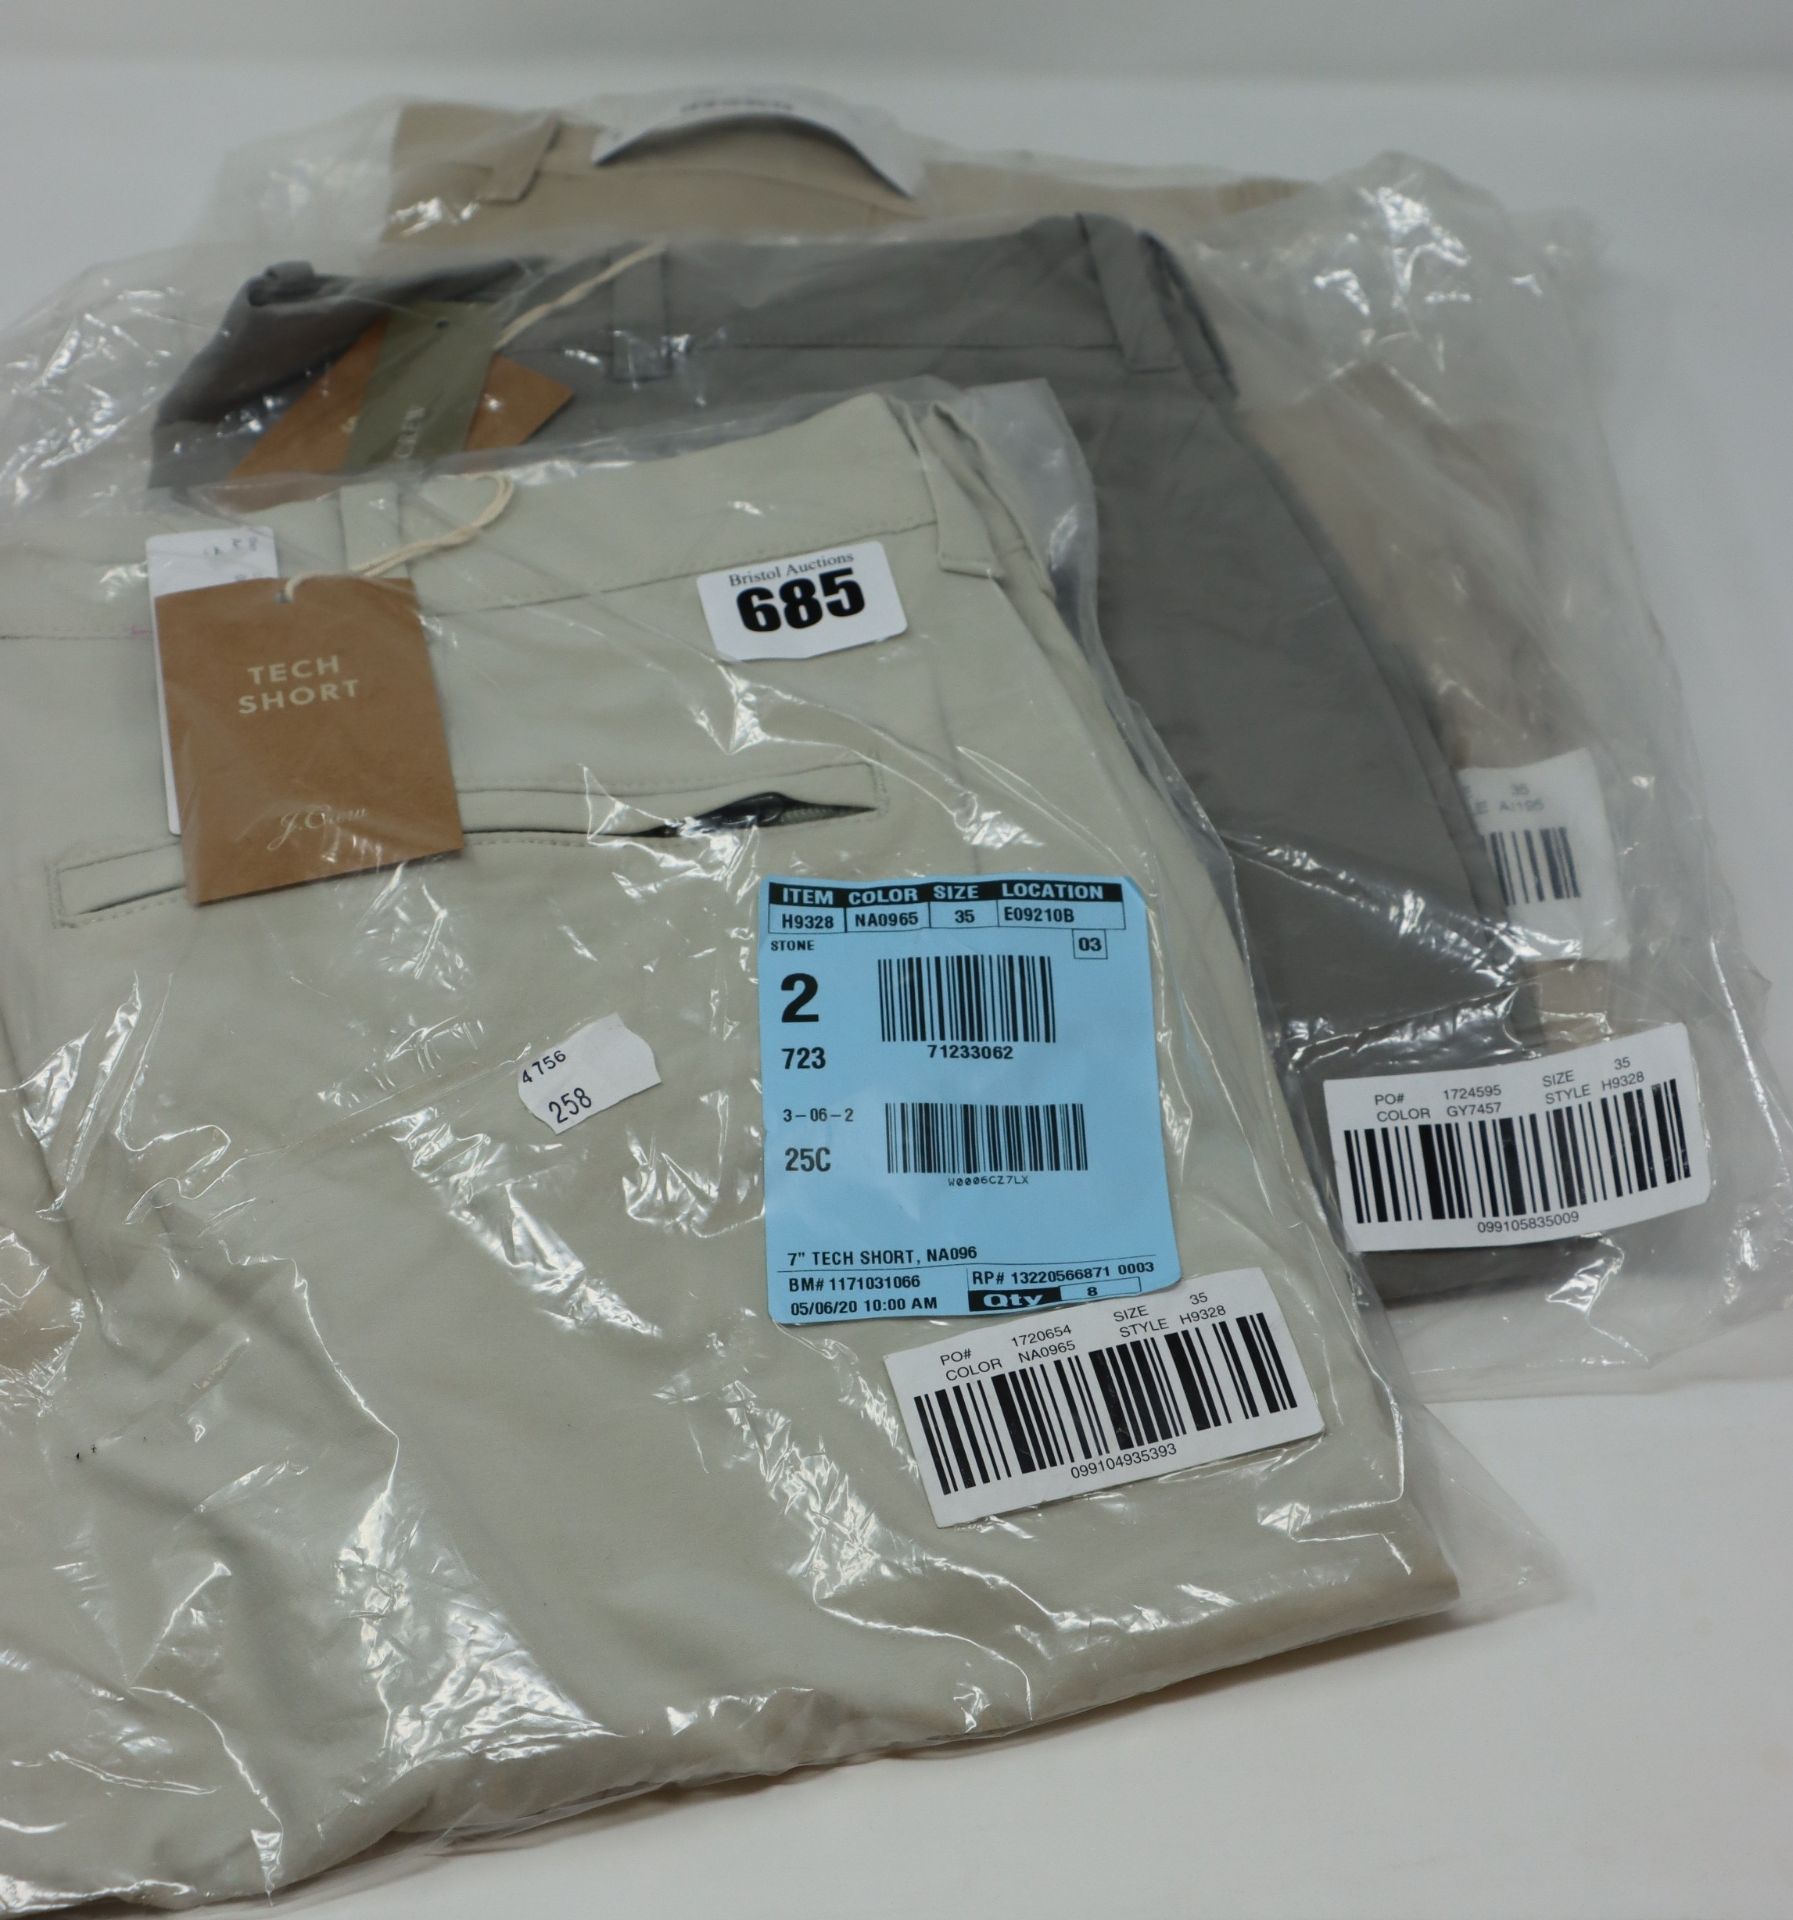 One as new J Crew 7" tech short size 35 (Colour: stone. Model: H9328). One as new J Crew 7" tech